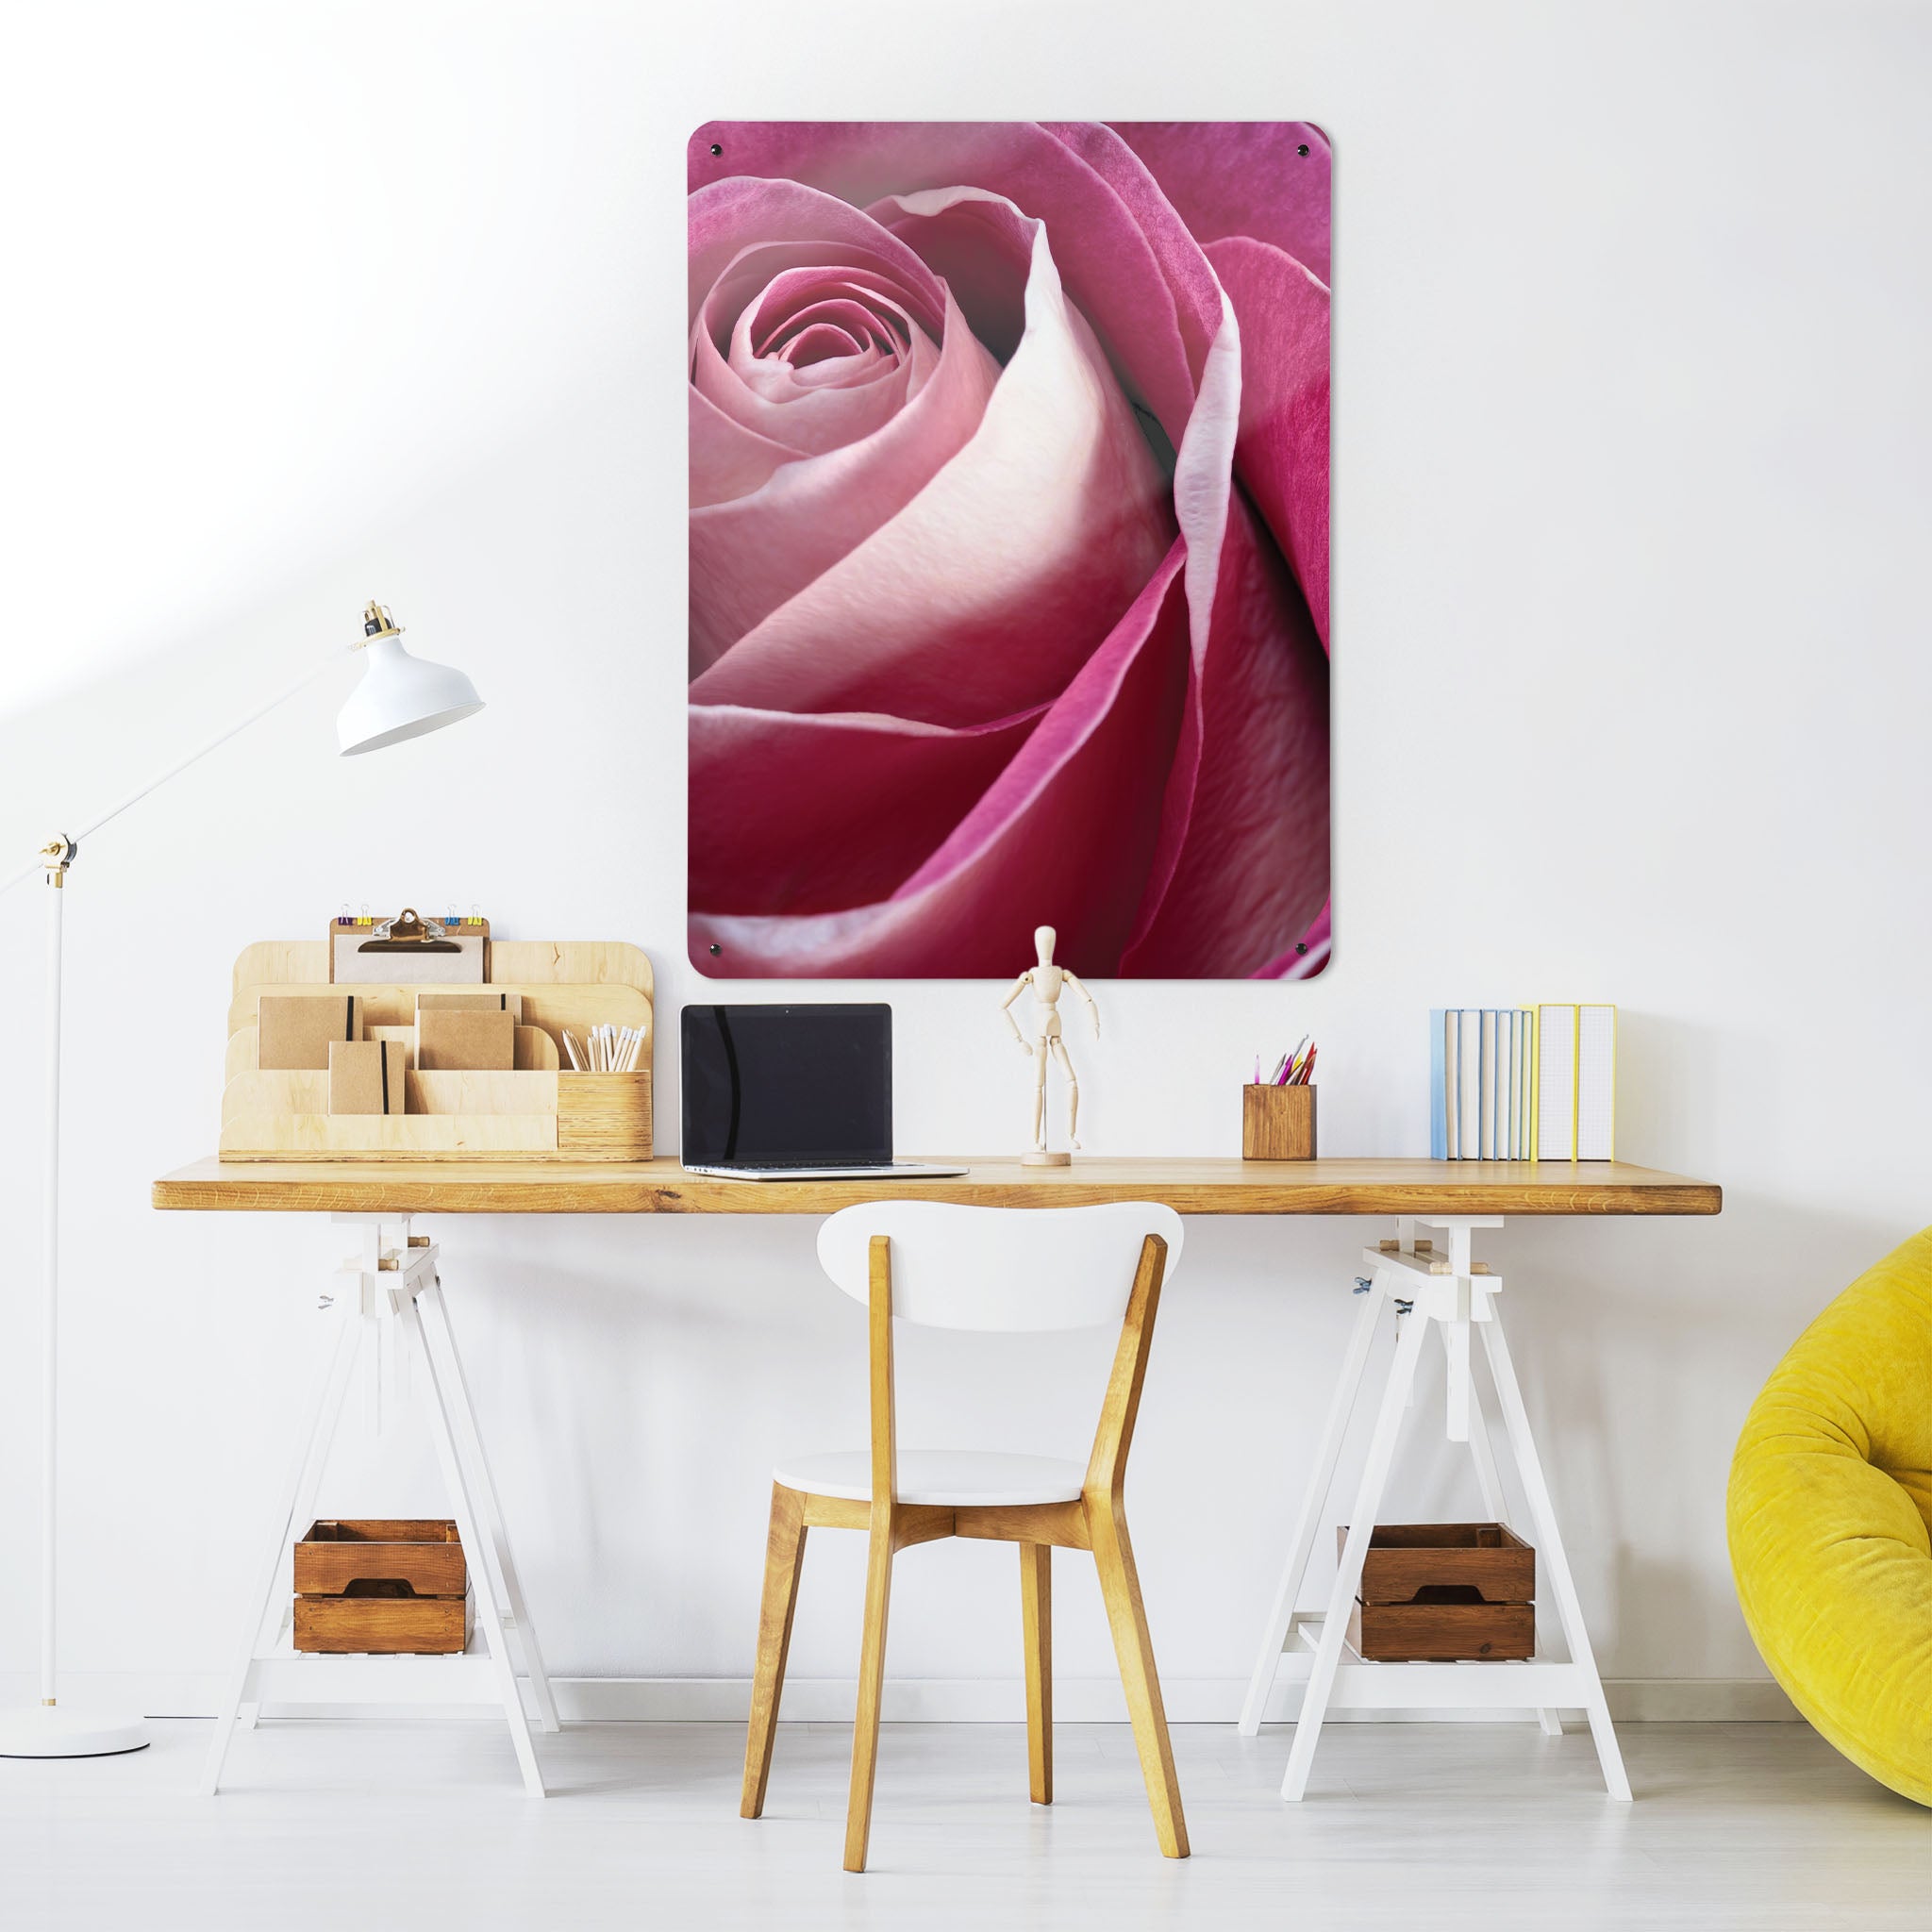 A desk in a workspace setting in a white interior with a magnetic metal wall art panel showing a photographic image of a pink rose